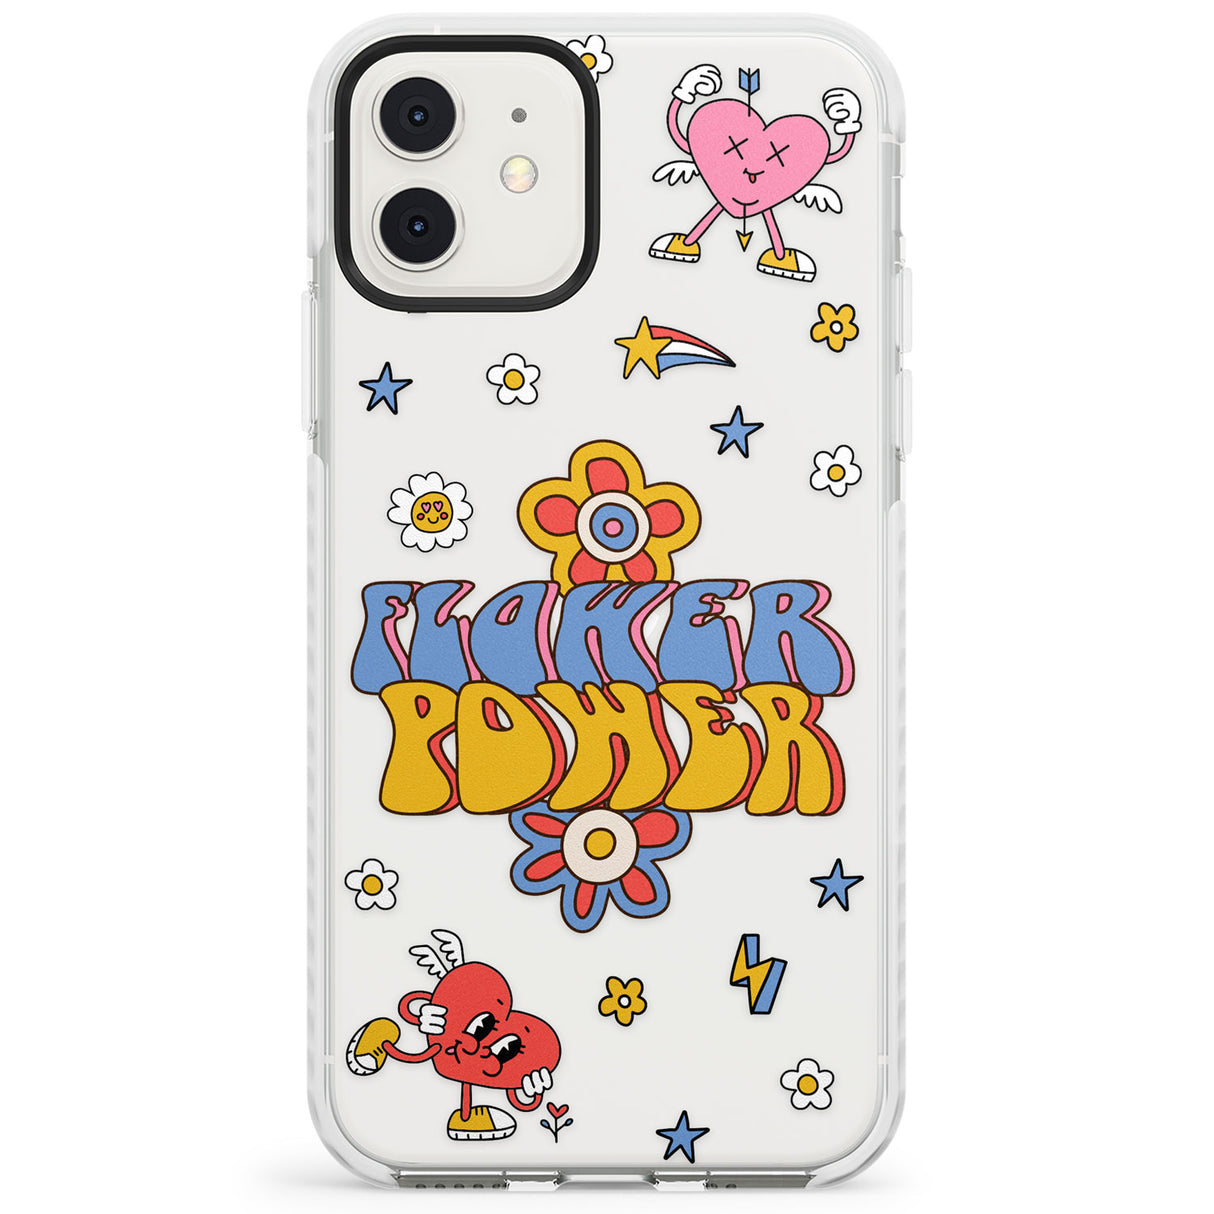 Flower Power Impact Phone Case for iPhone 11, iphone 12